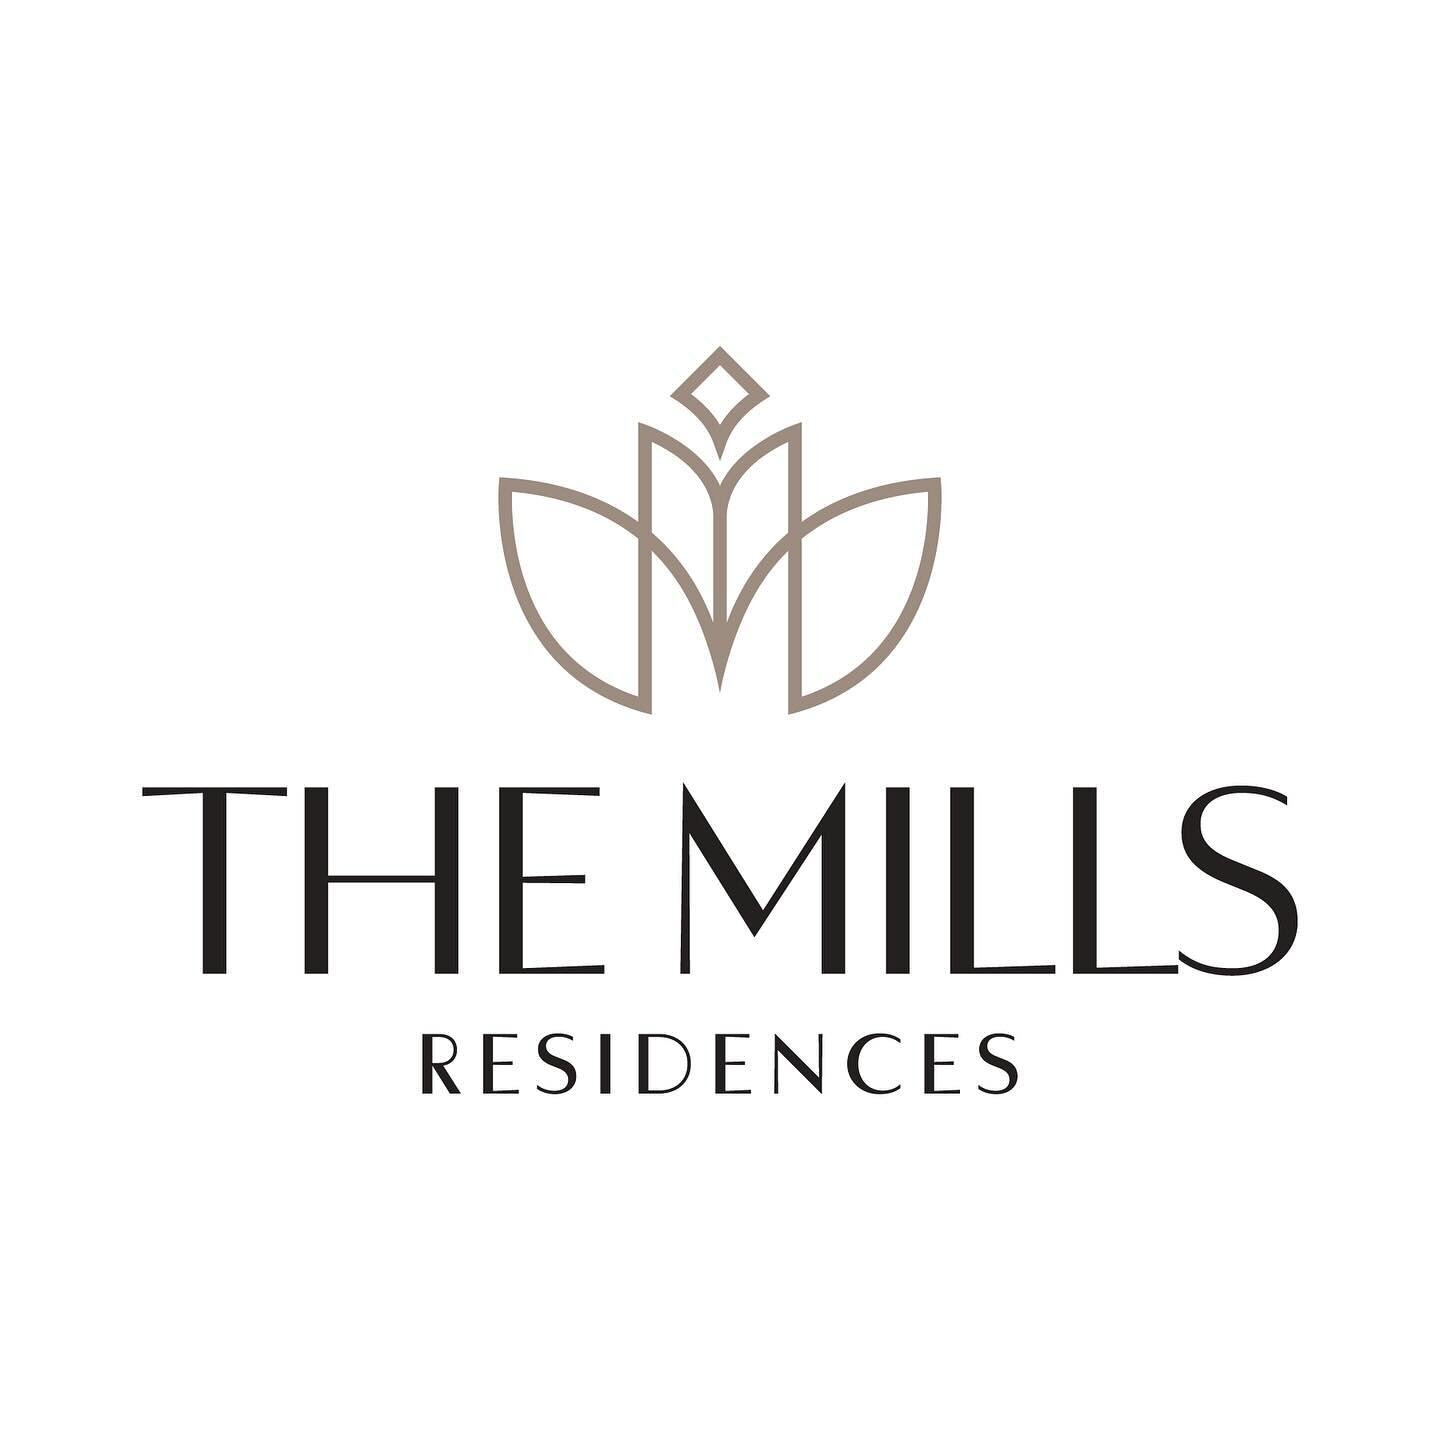 Excited to introduce you to a new brand for Halifax - @themillsresidences on Spring Garden Rd. Our latest design collaboration. The development is under construction and its new leasing centre is opening in a few weeks on the corner of spring garden 